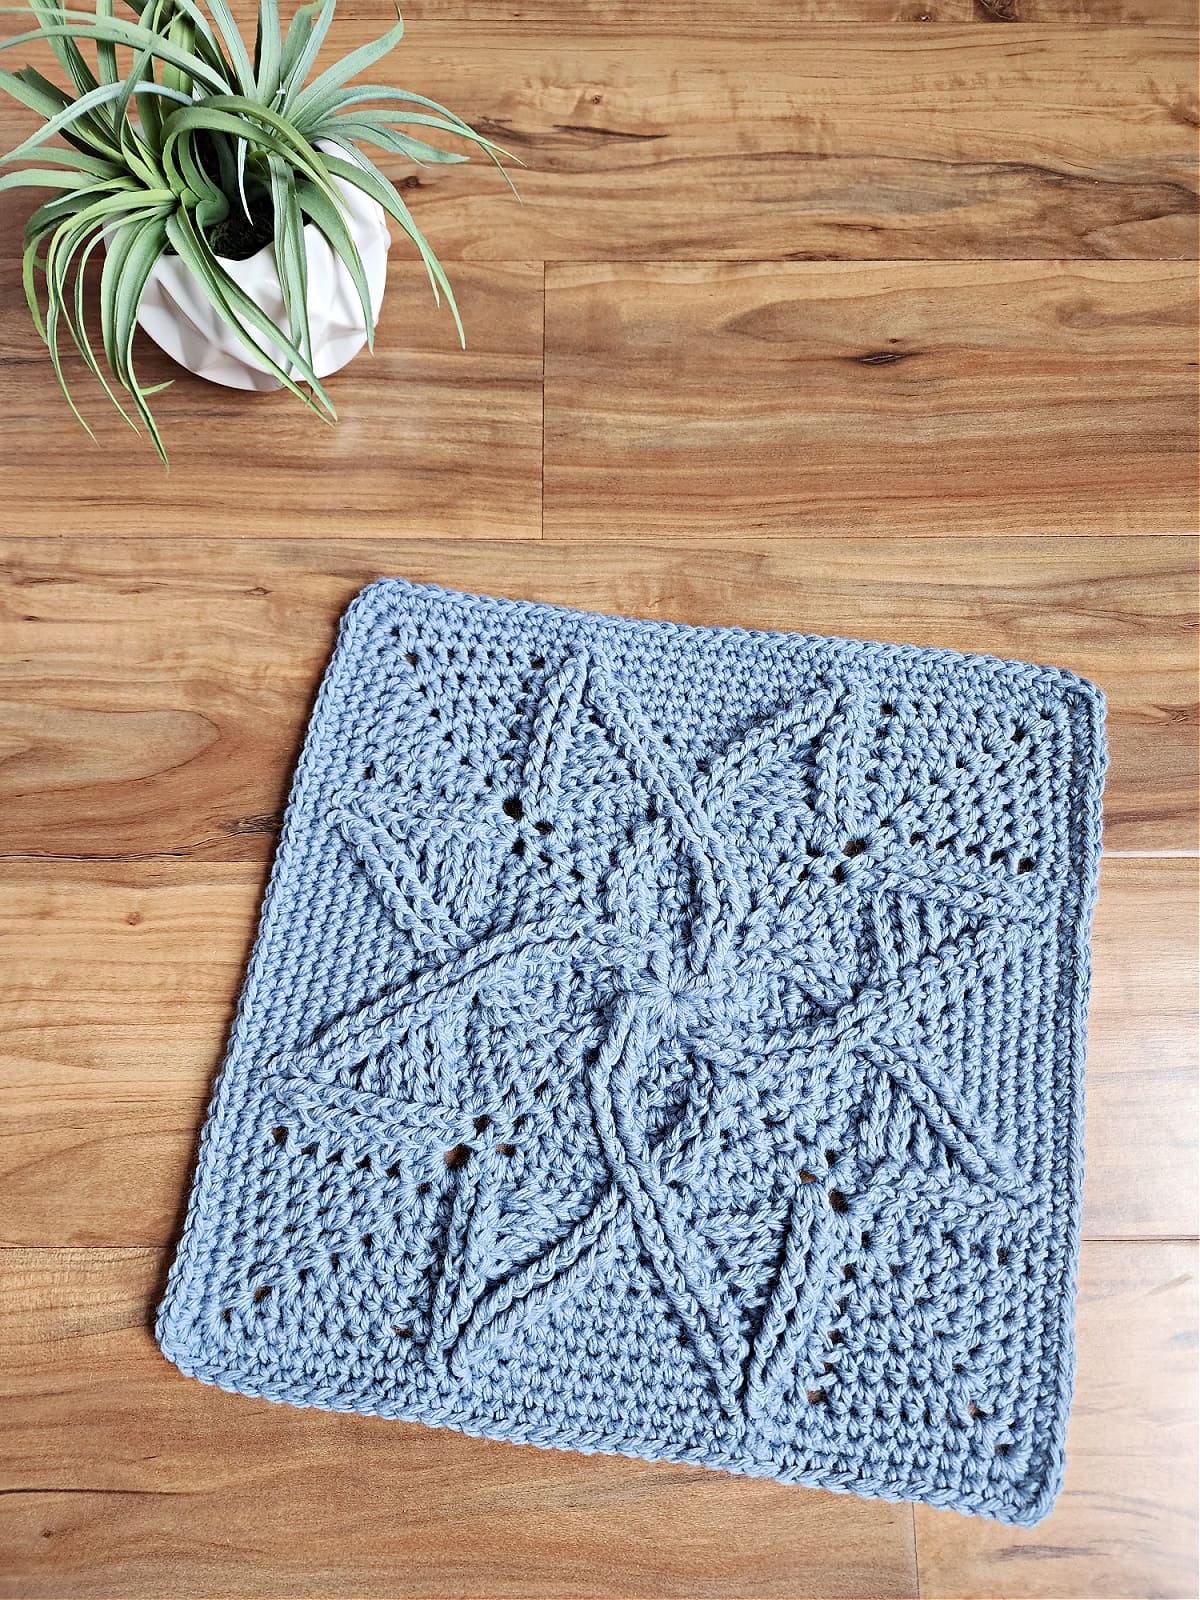 Steel blue cabled crochet blanket square laying on wood floor with small potted plant.